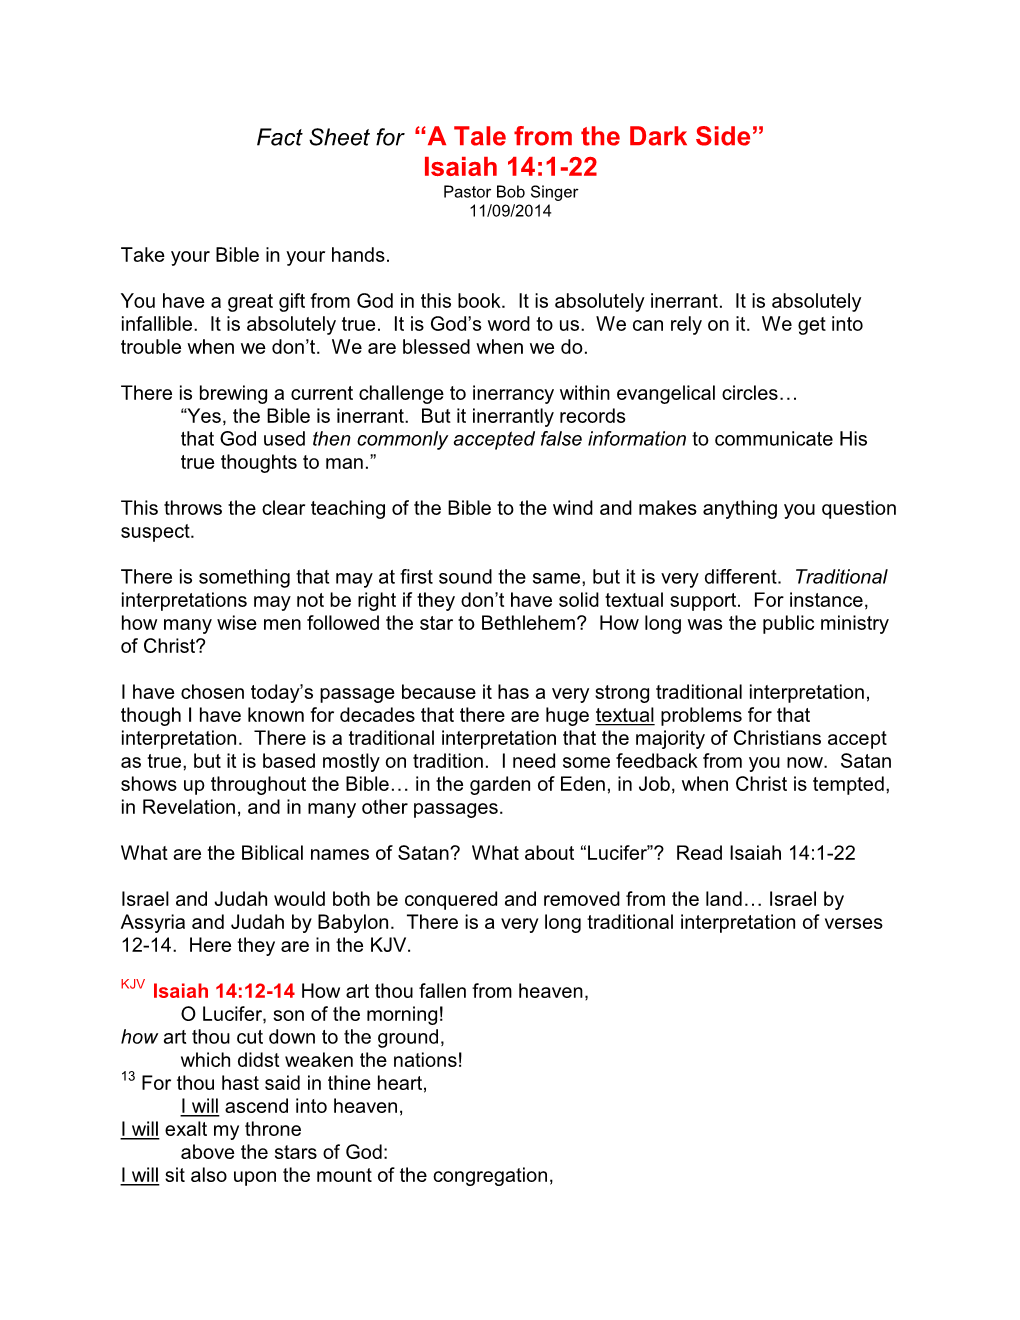 Fact Sheet for “A Tale from the Dark Side” Isaiah 14:1-22 Pastor Bob Singer 11/09/2014